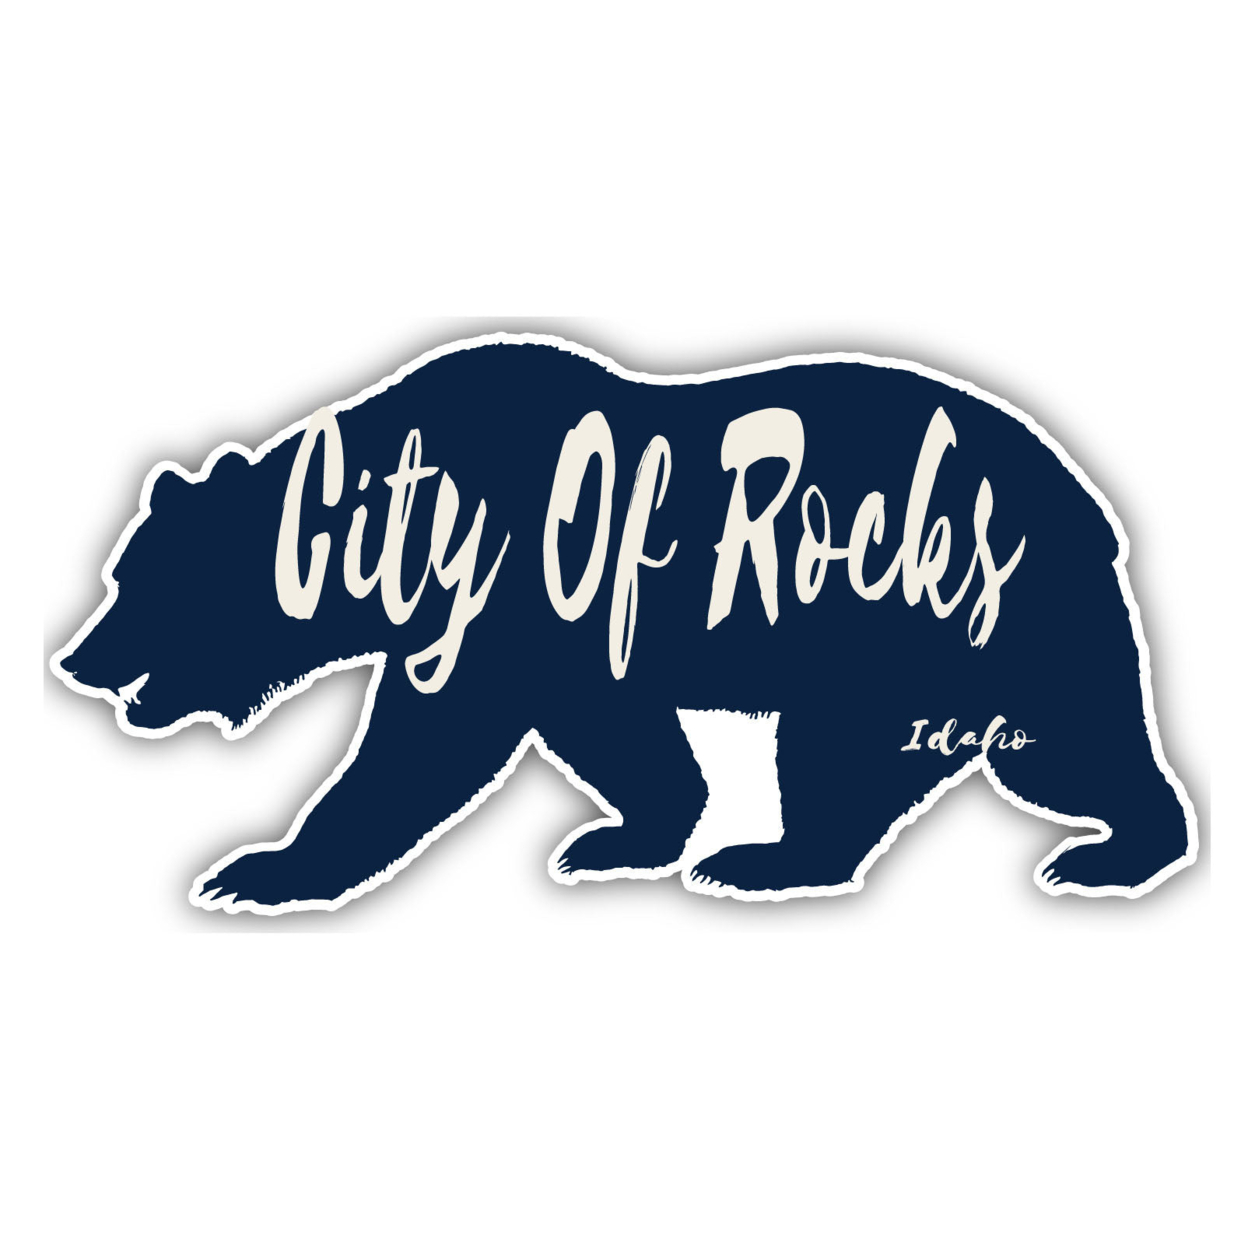 City Of Rocks Idaho Souvenir Decorative Stickers (Choose Theme And Size) - 4-Pack, 12-Inch, Tent